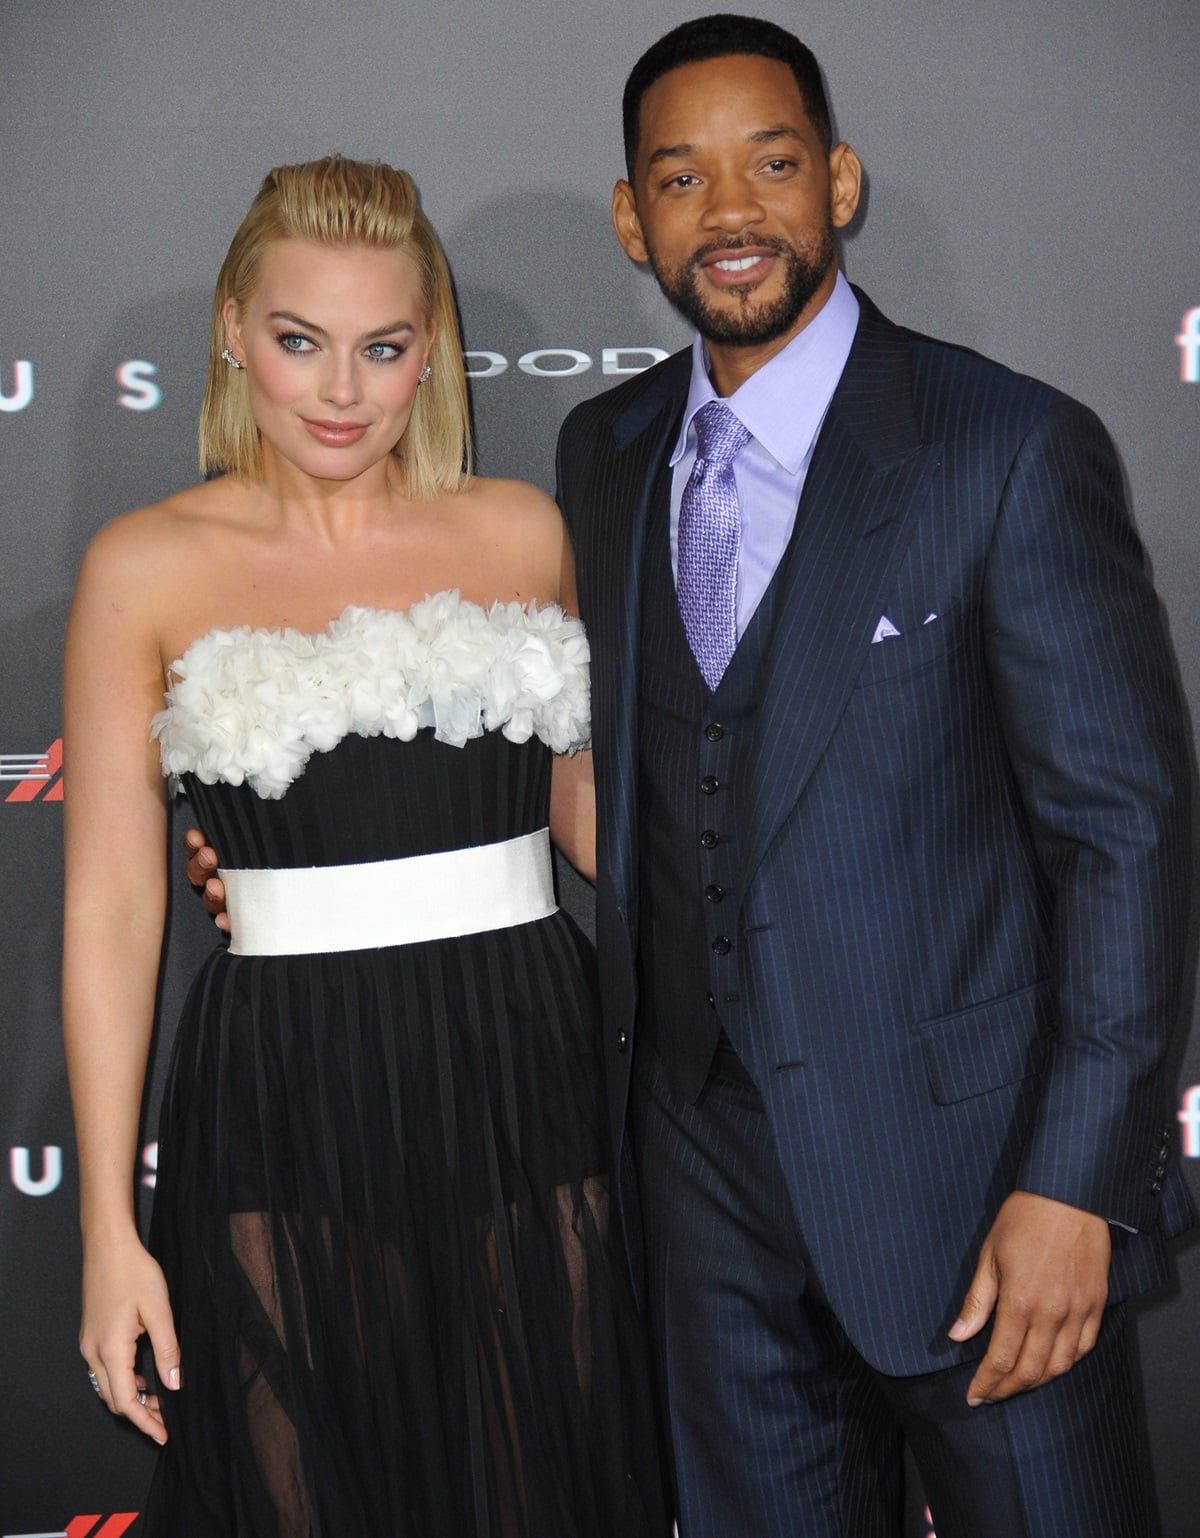 Will Smith's height of 6ft 1 ½ (186.7 cm) towers over Margot Robbie's height of 5ft 5 ½ (166.4 cm), making her appear much shorter in comparison